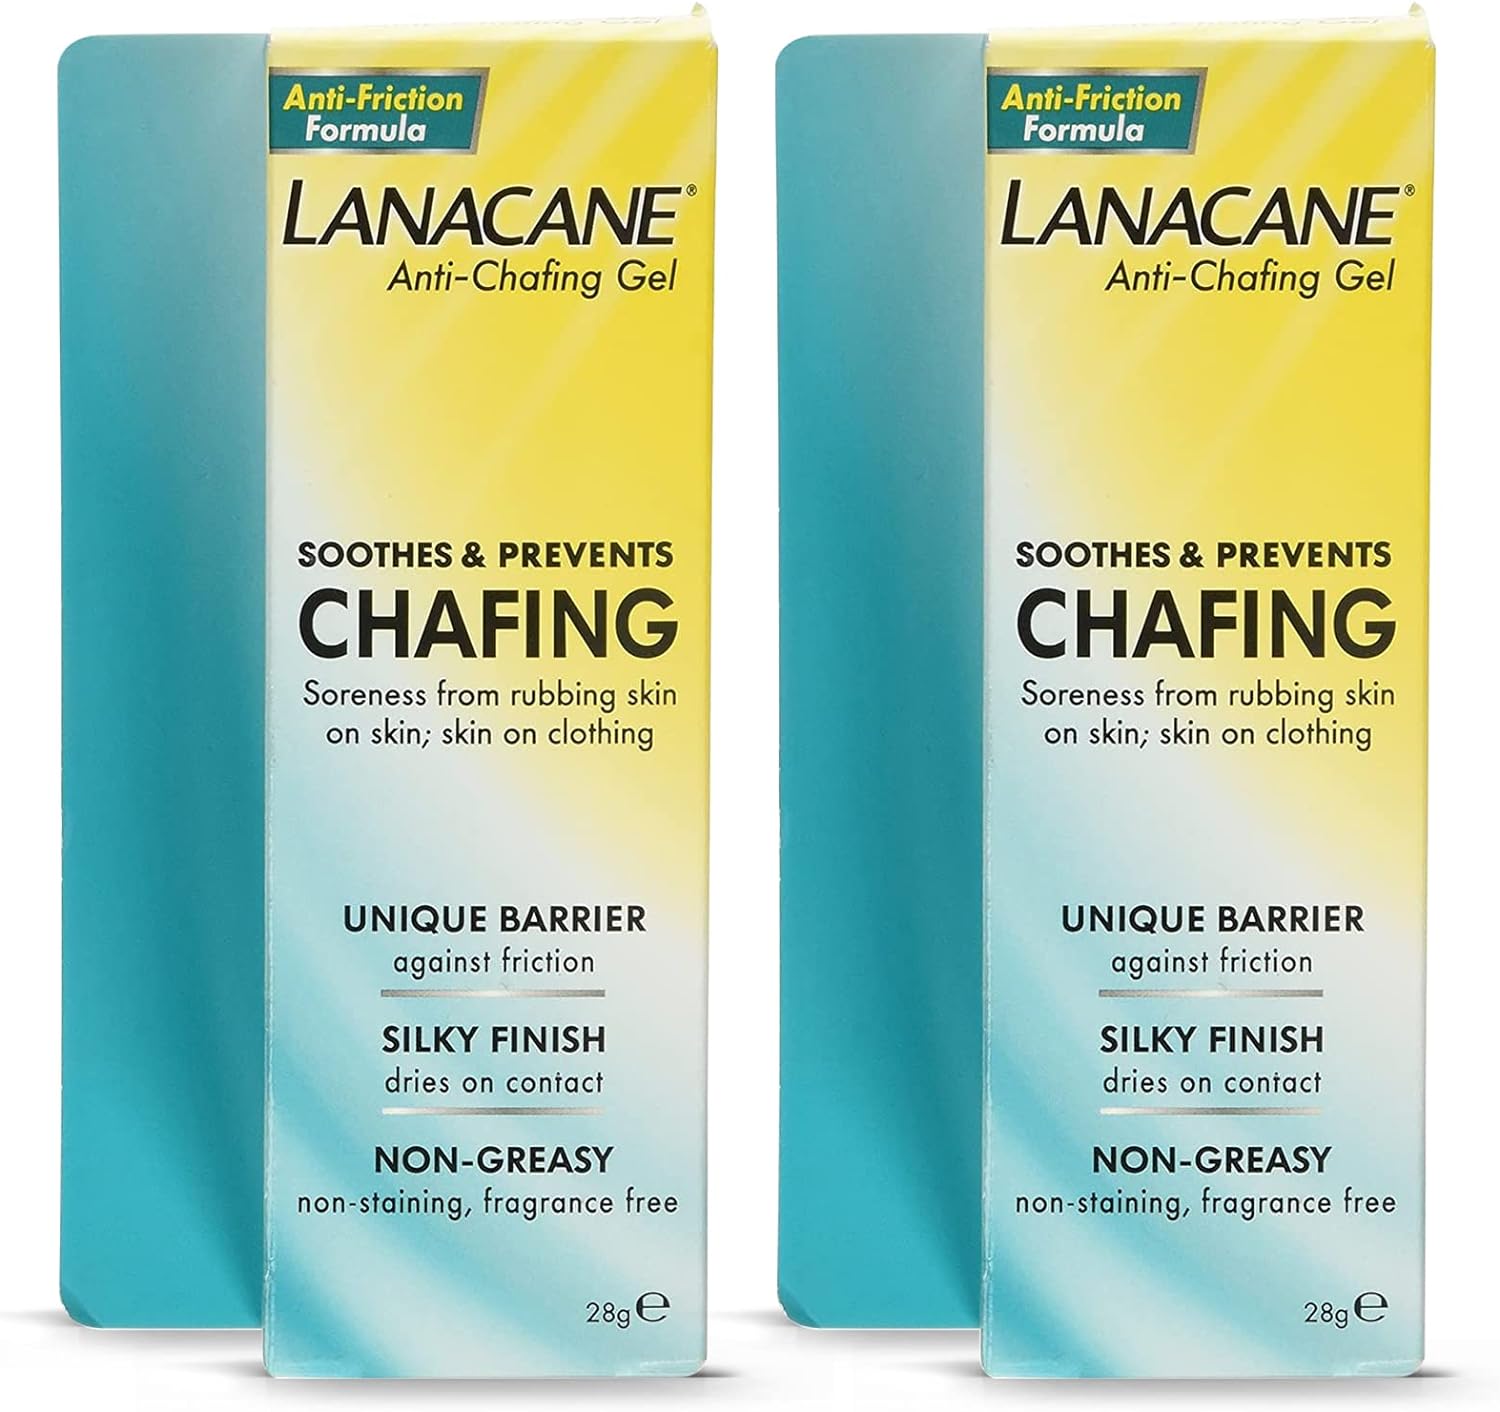 Lanacane Non-staining Anti-chafing & Anti-friction Gel, Prevent Thigh Rashes, Pack of 2, Total of 56 mlml, Unscented